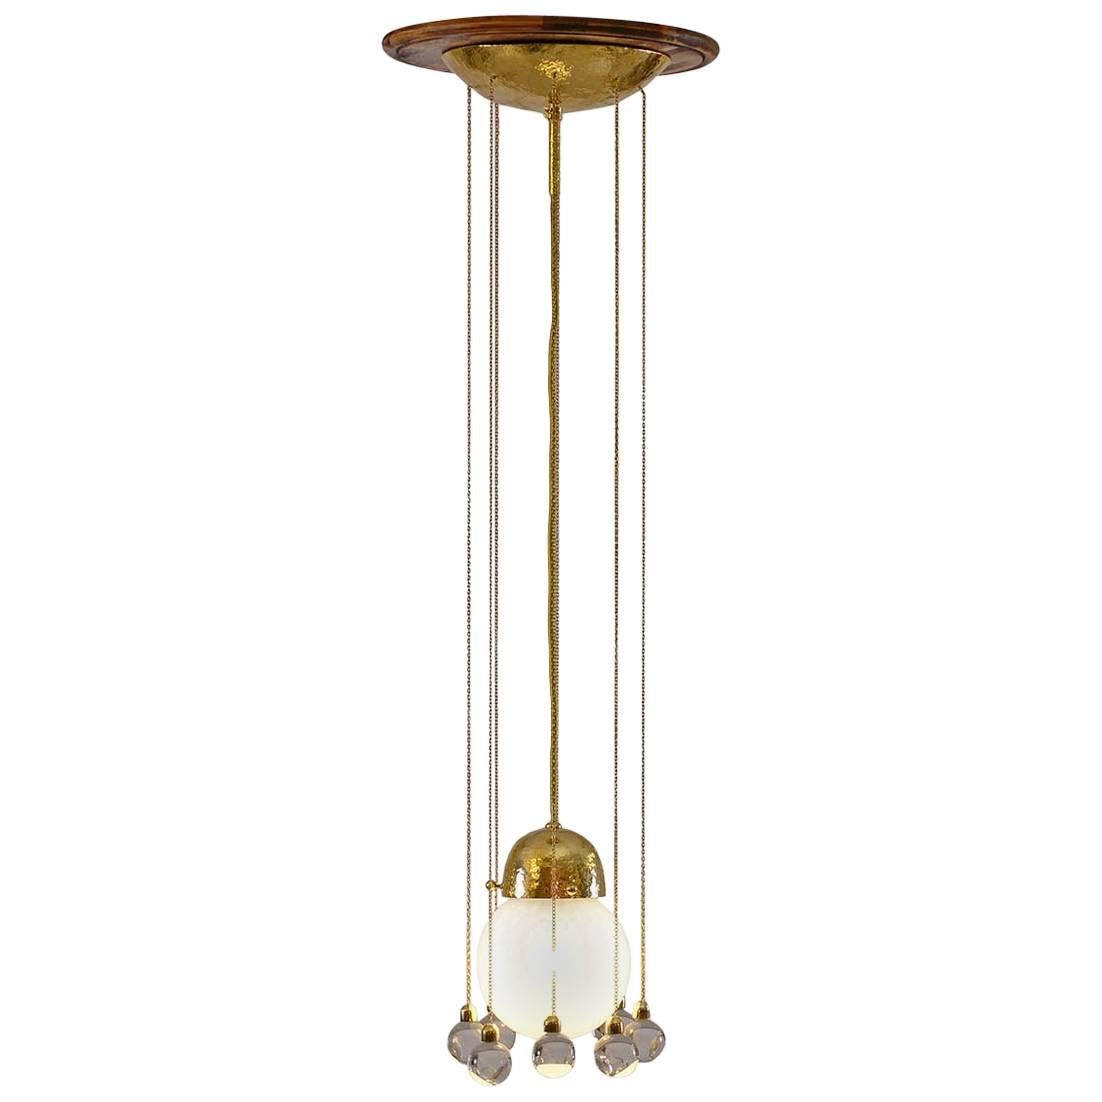 A pendant-lamp, very often used by Josef Hoffmann. Punched or plain, several finishes. Total drop custom-made.
Originally manufactured at the Wiener Werkstaette Atelier, now custom made production at the woka lamps workshop in Vienna.
Measures: